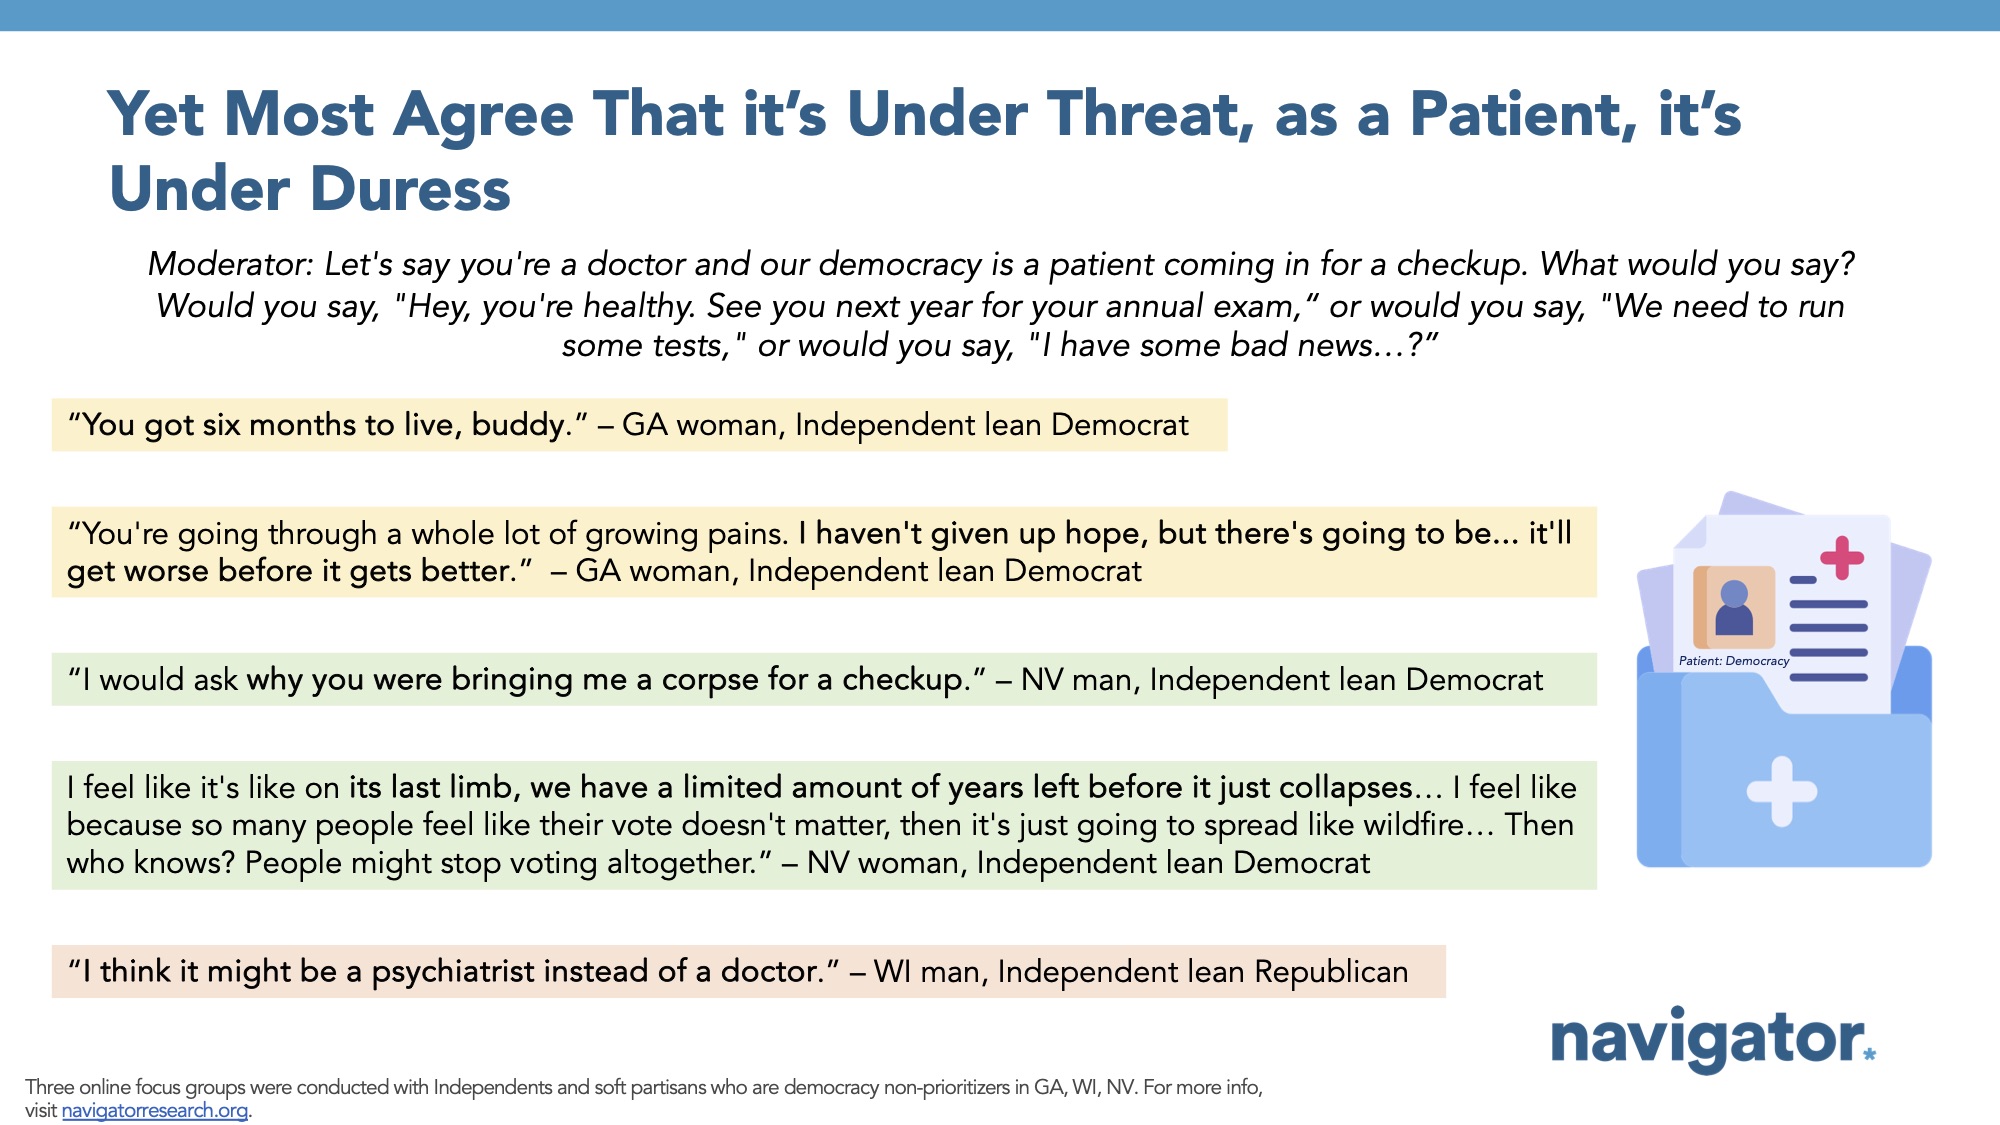 Focus group report slide titled: Yet Most Agree That it’s Under Threat, as a Patient, it’s Under Duress